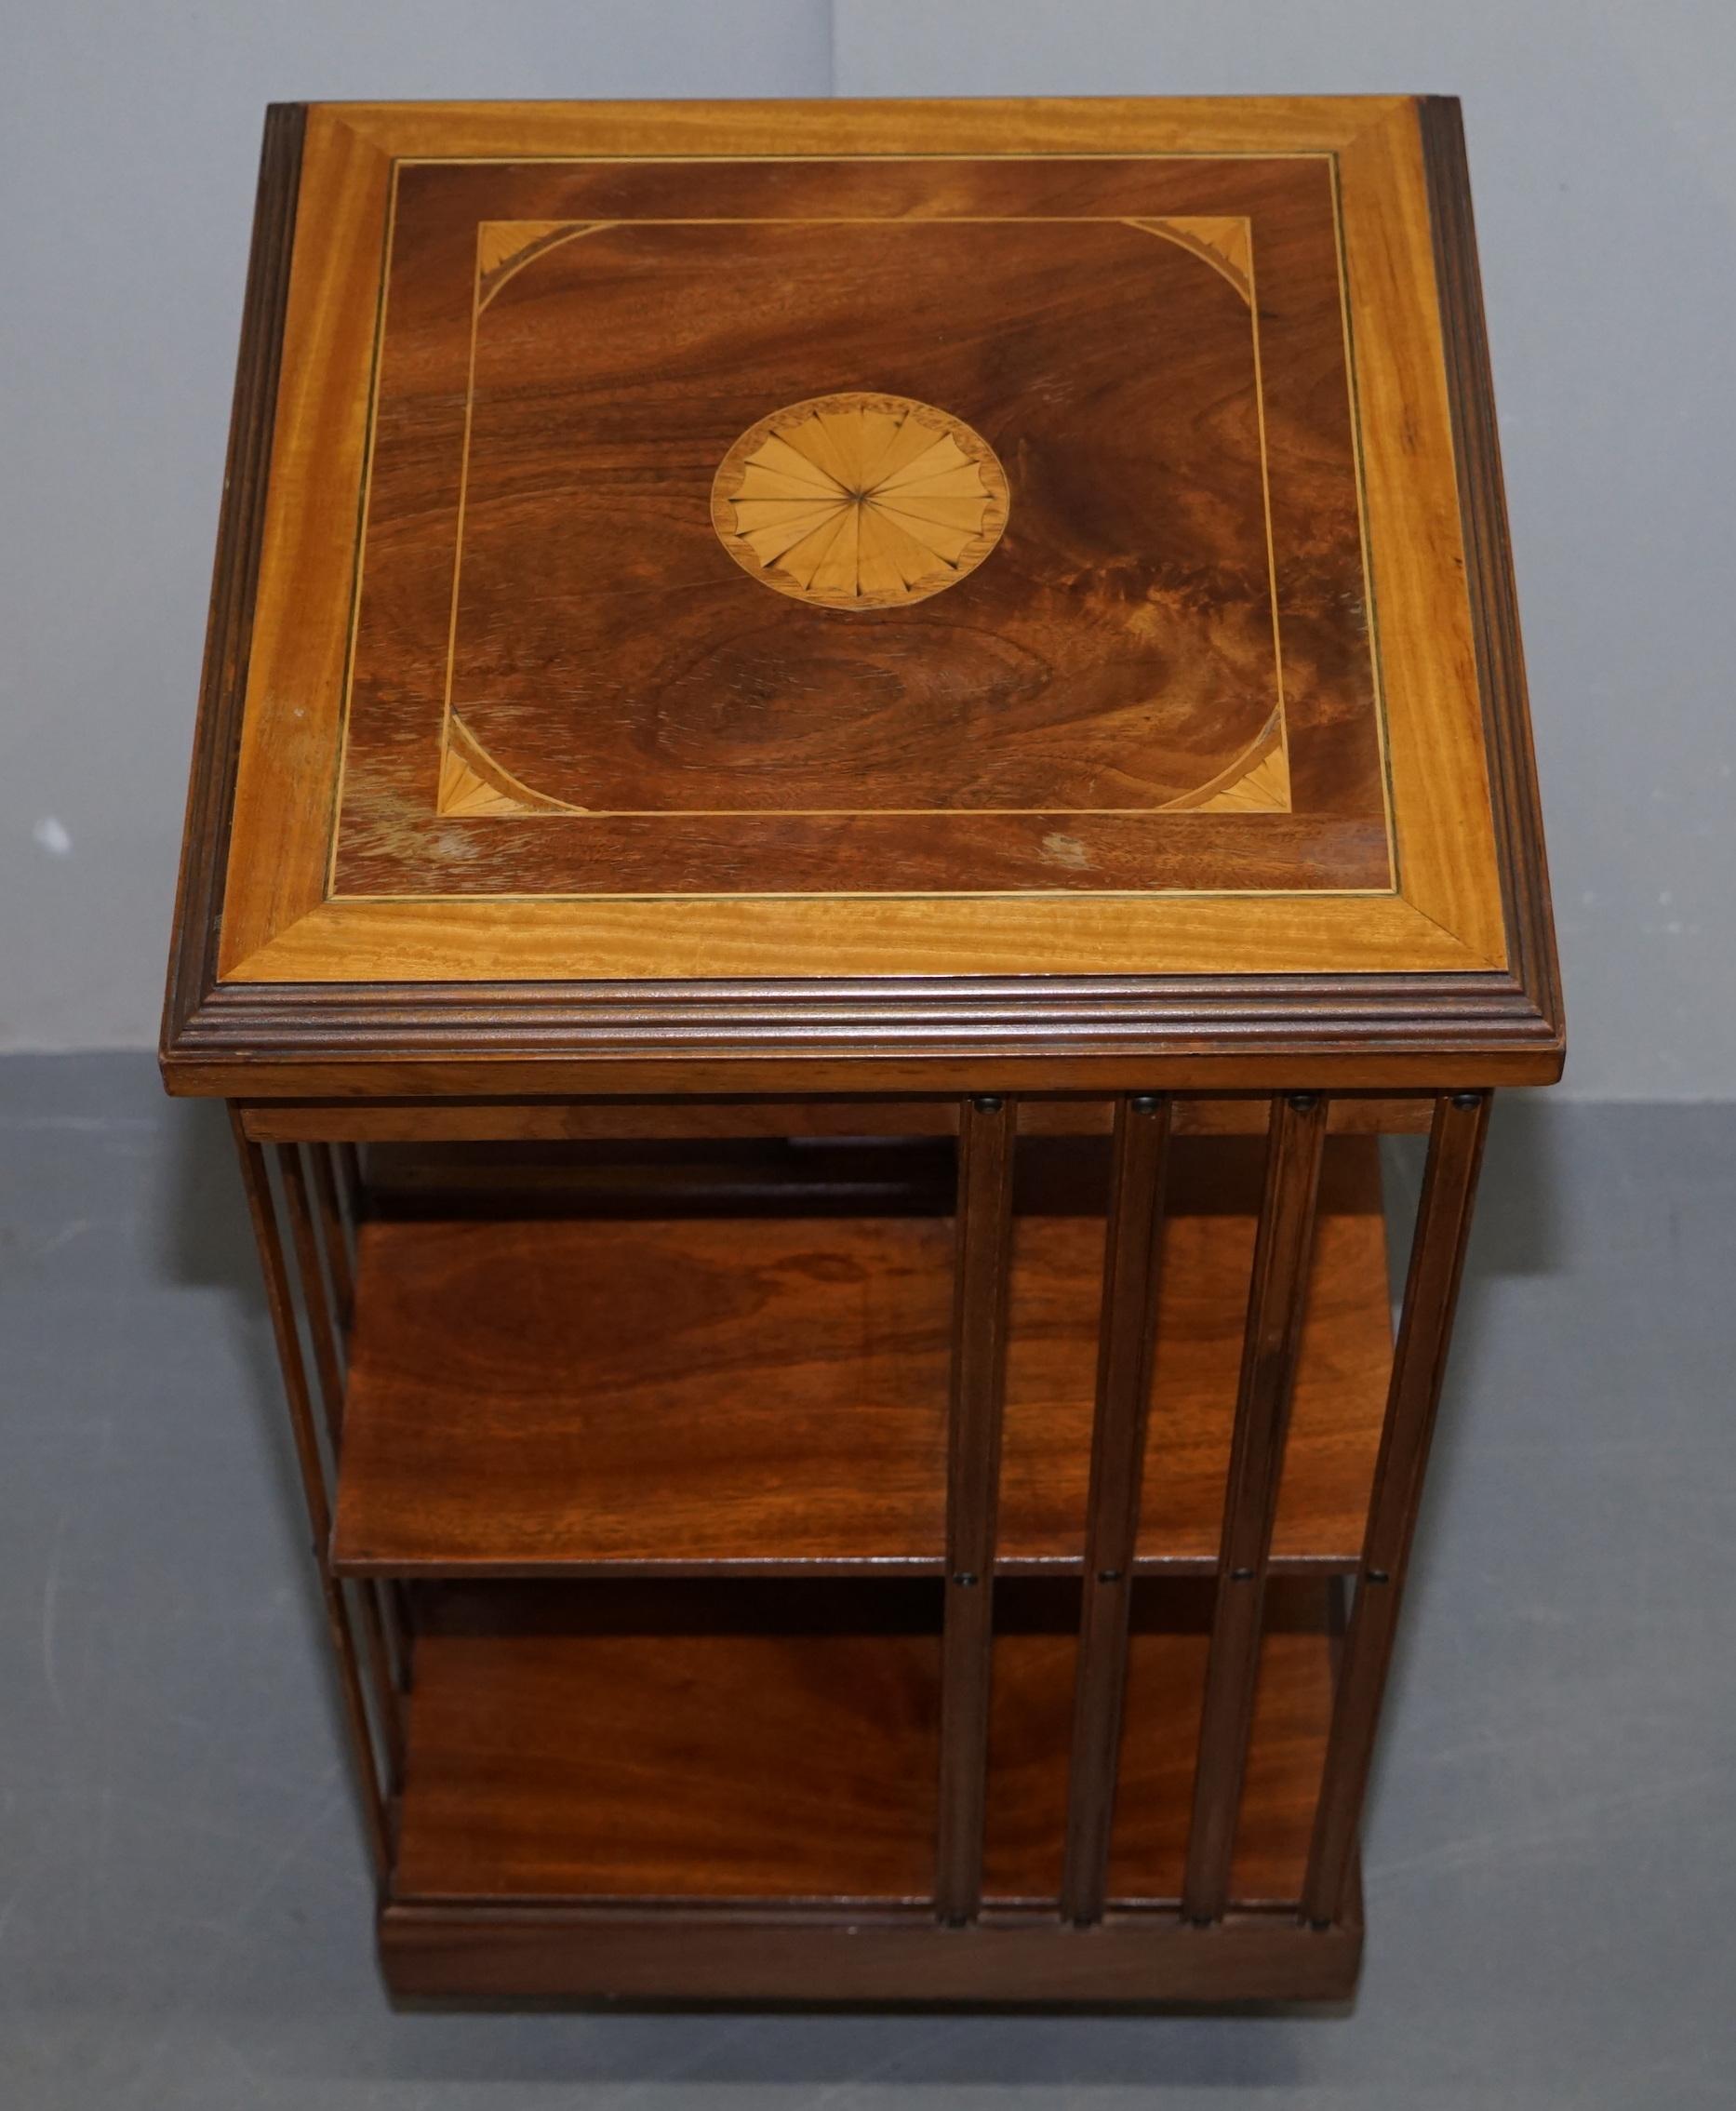 Hand-Crafted Edwardian Burr Walnut & Satinwood Revolving Bookcases Sheraton Inlaid circa 1900 For Sale